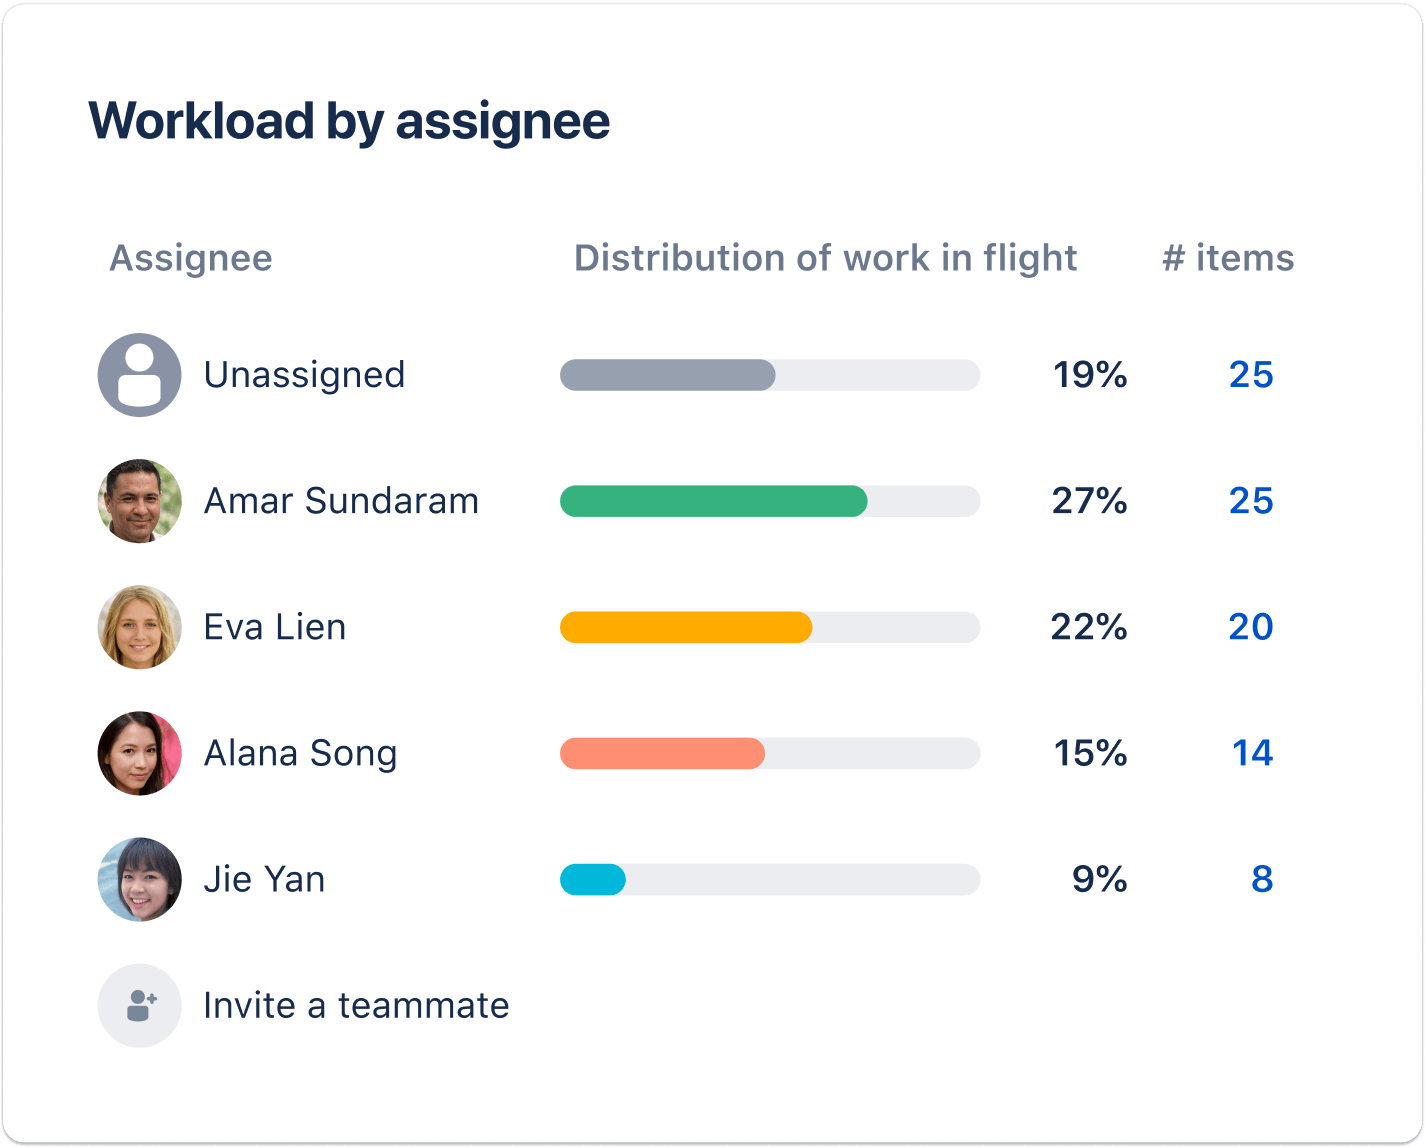 Tasks by assignee